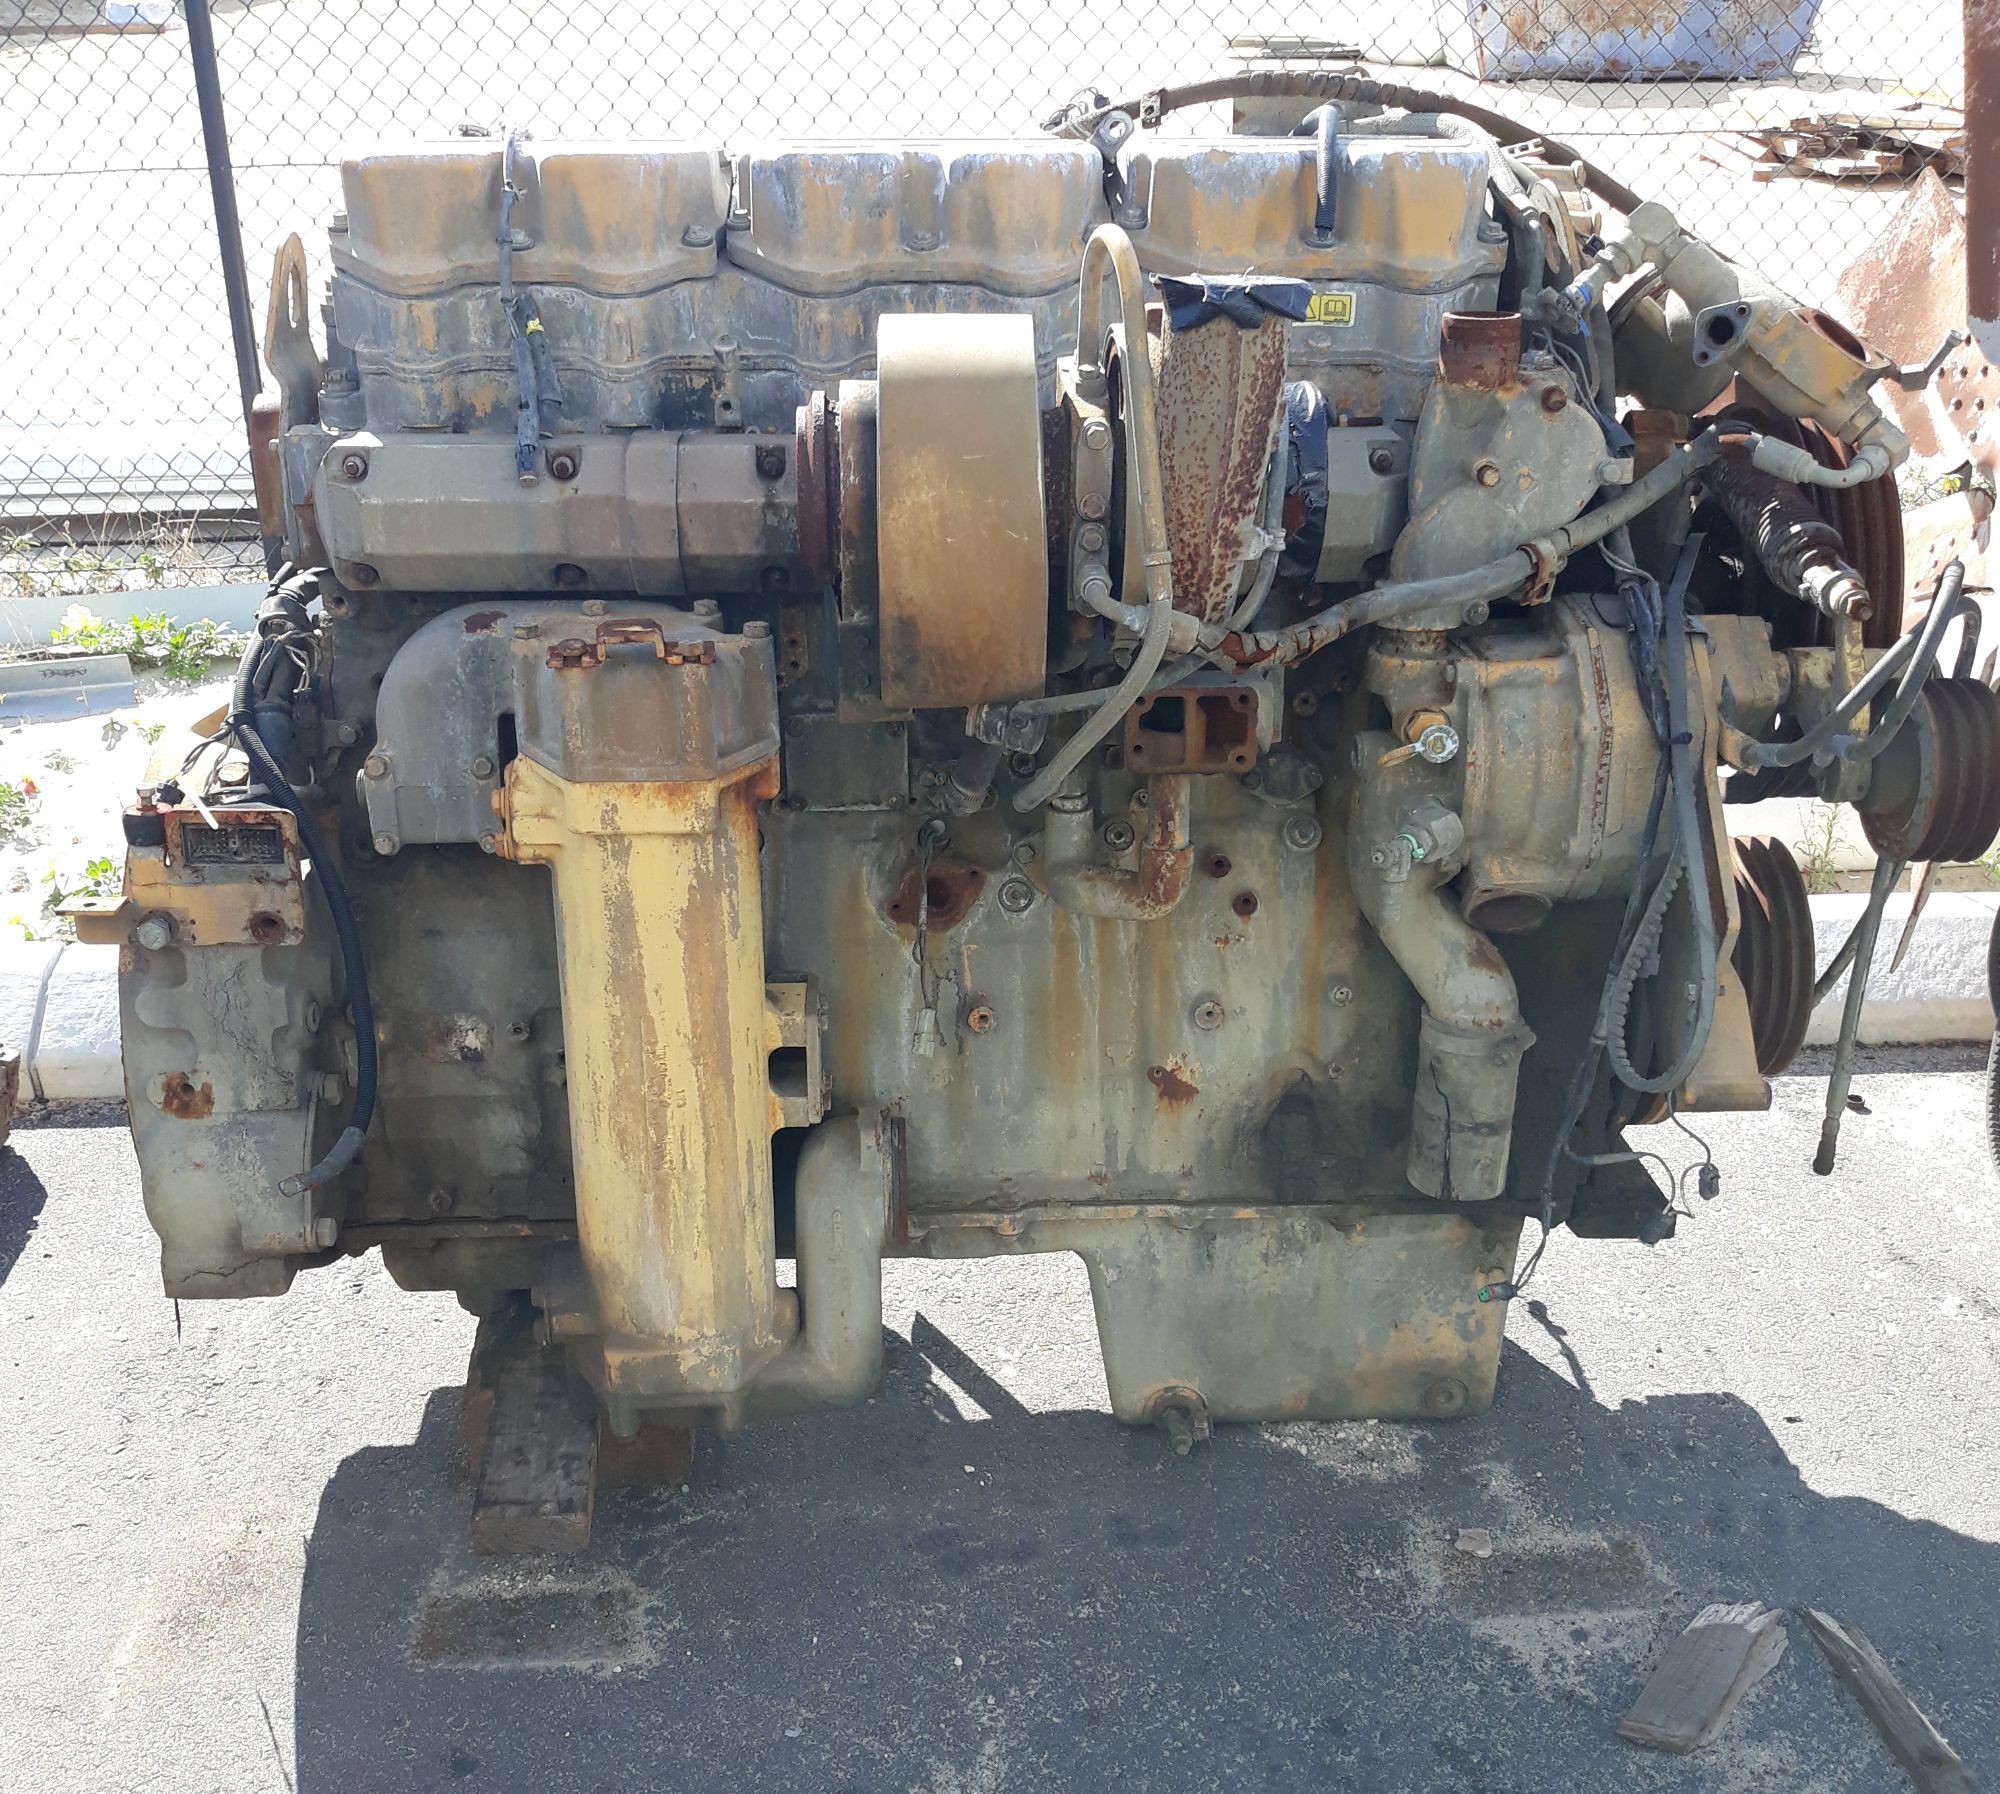 CaterpillarÂ® C15 R2900 Second Hand Engine dismantled and used parts now available for sale throughout Australia